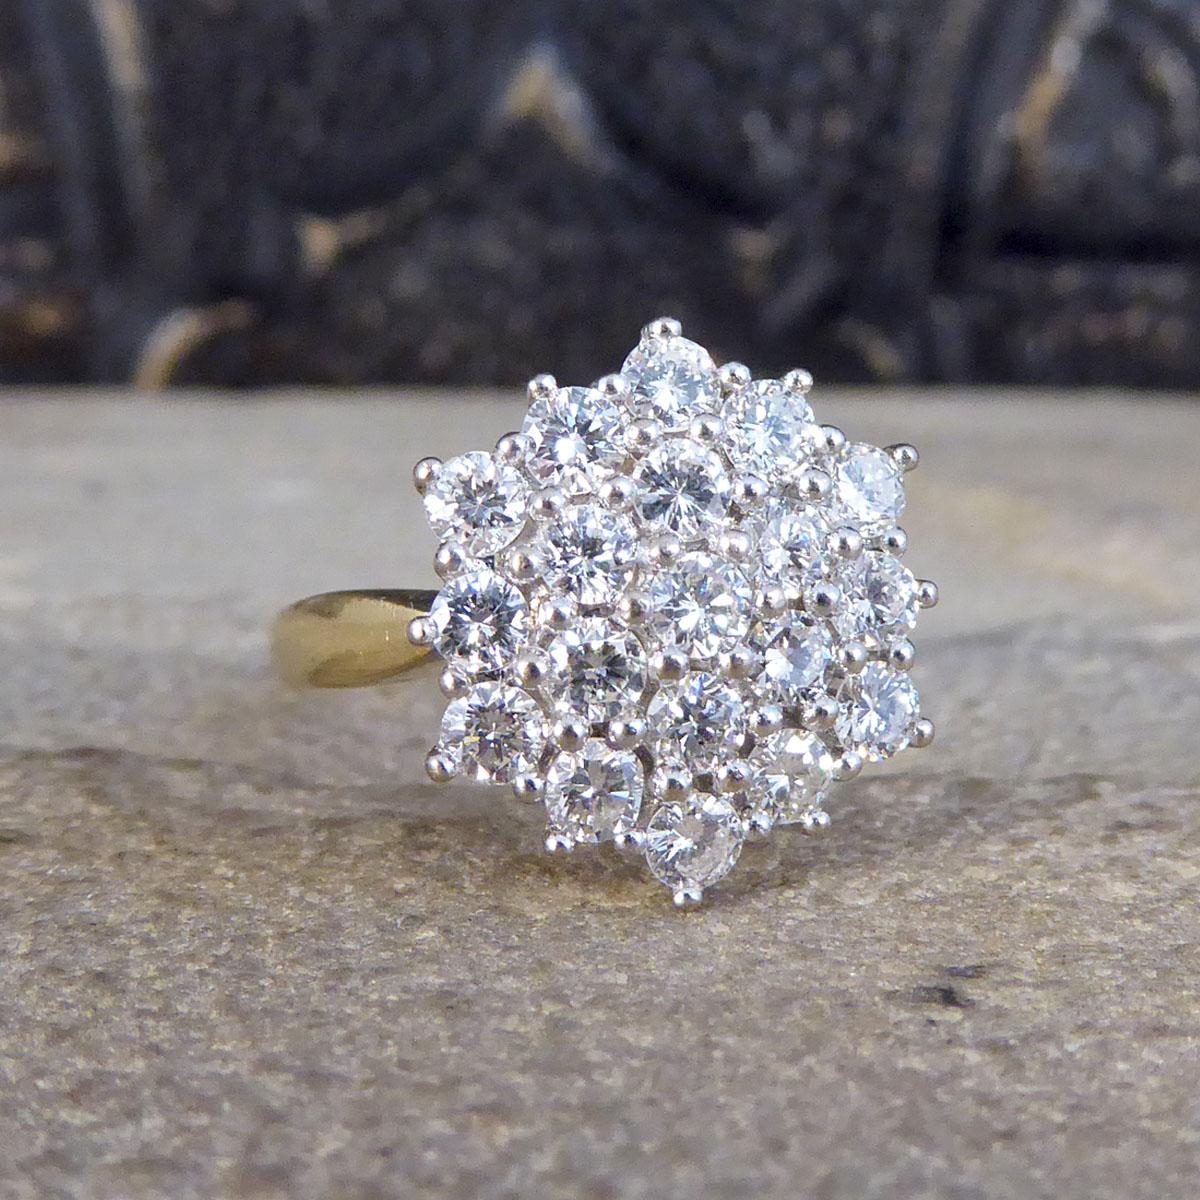 Such a lovely vintage ring modelled in 18ct Yellow Gold with an 18ct White Gold setting holding a Diamond cluster. Holding a total of 1.14ct of Brilliant Cut Diamonds well matched and held securely into place in a claw setting. A great vintage ring